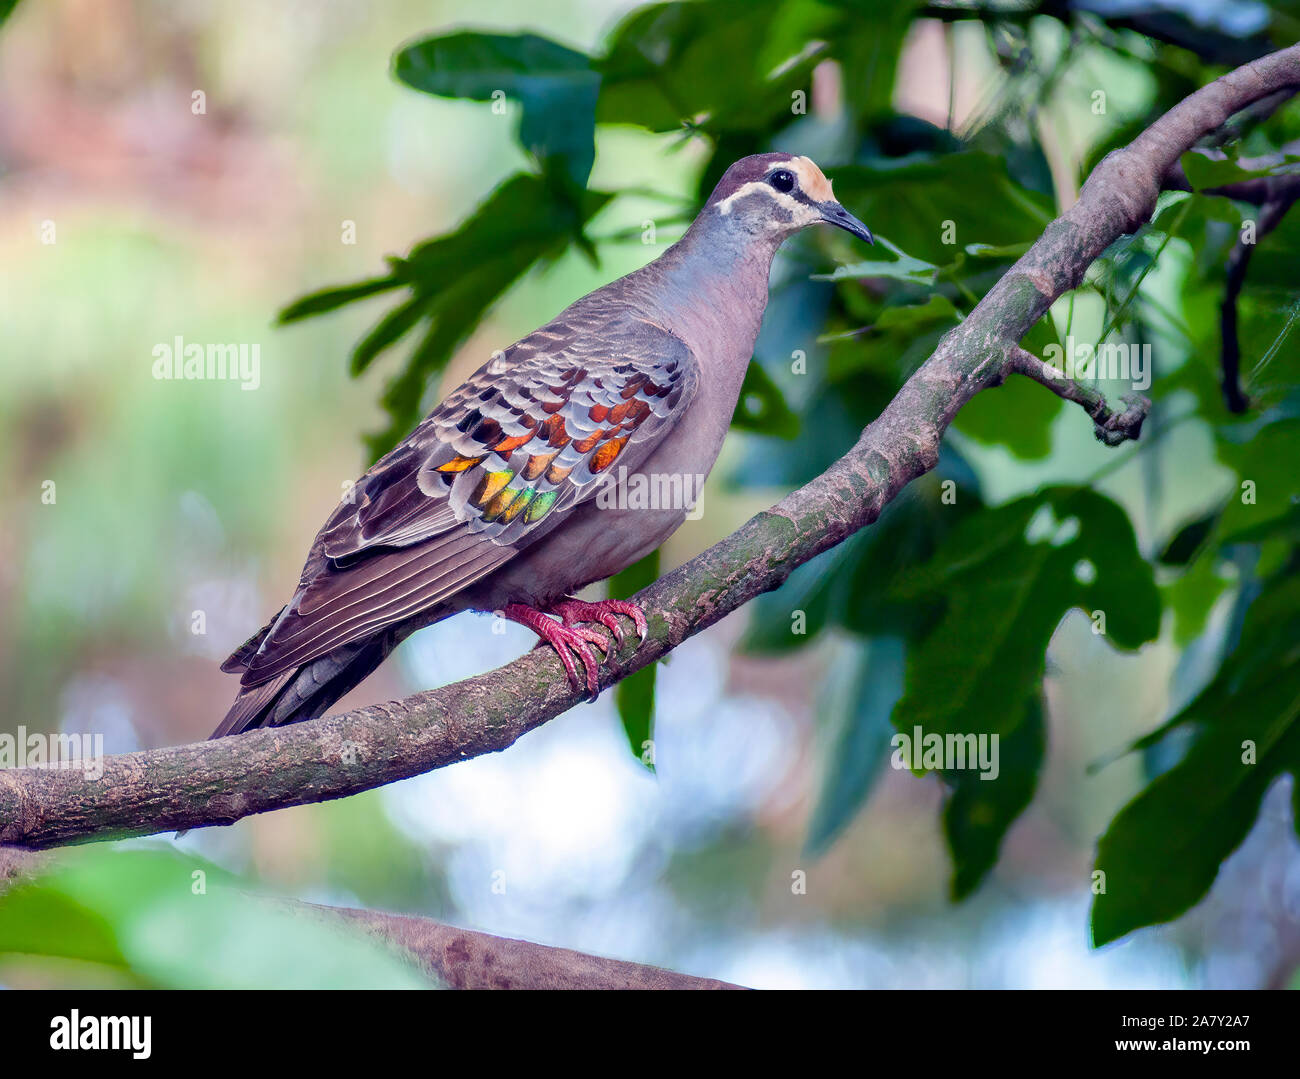 An Australian Common Bronzewing Pigeon perched on a branch in a leafy tree in a garden Stock Photo